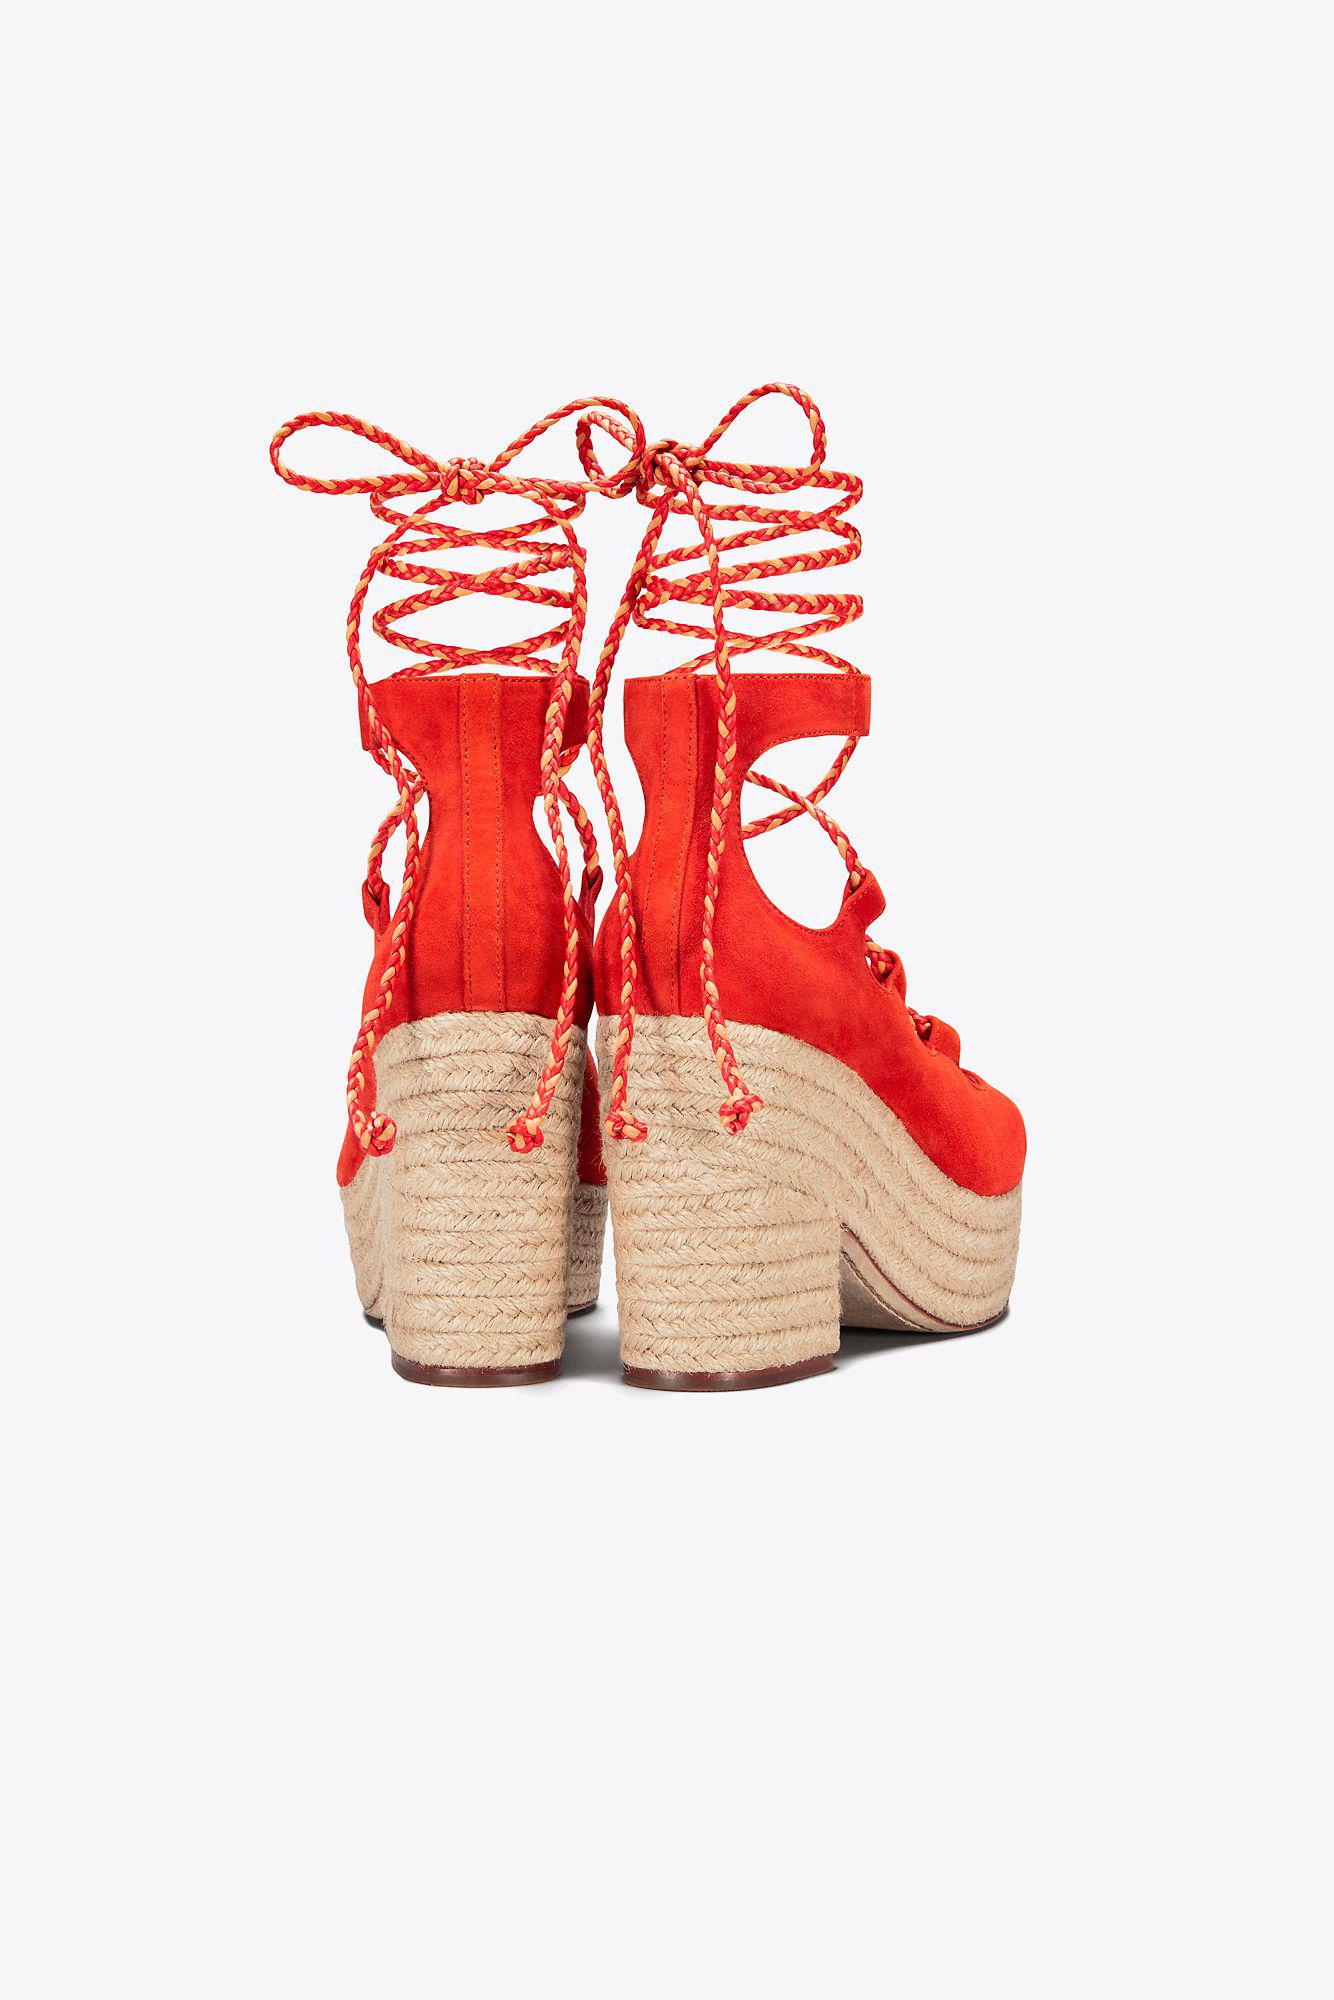 Tory Burch Suede Positano Lace-up Platform Espadrille in Poppy 